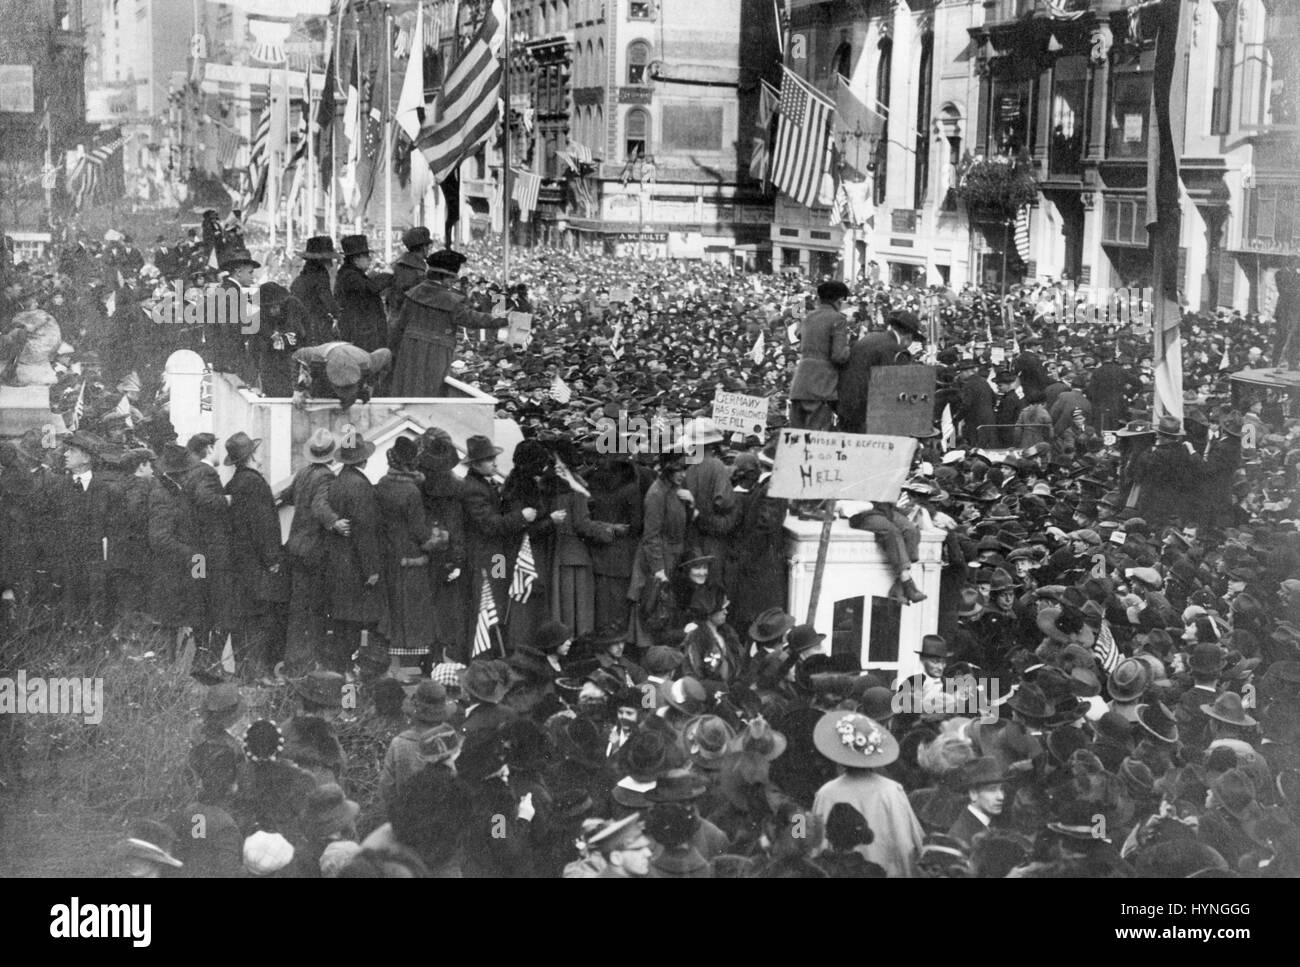 World War I Armistice Day Celebration. Wild crowds are shown in front of the New York Public Llibrary. New York, 1918. Stock Photo